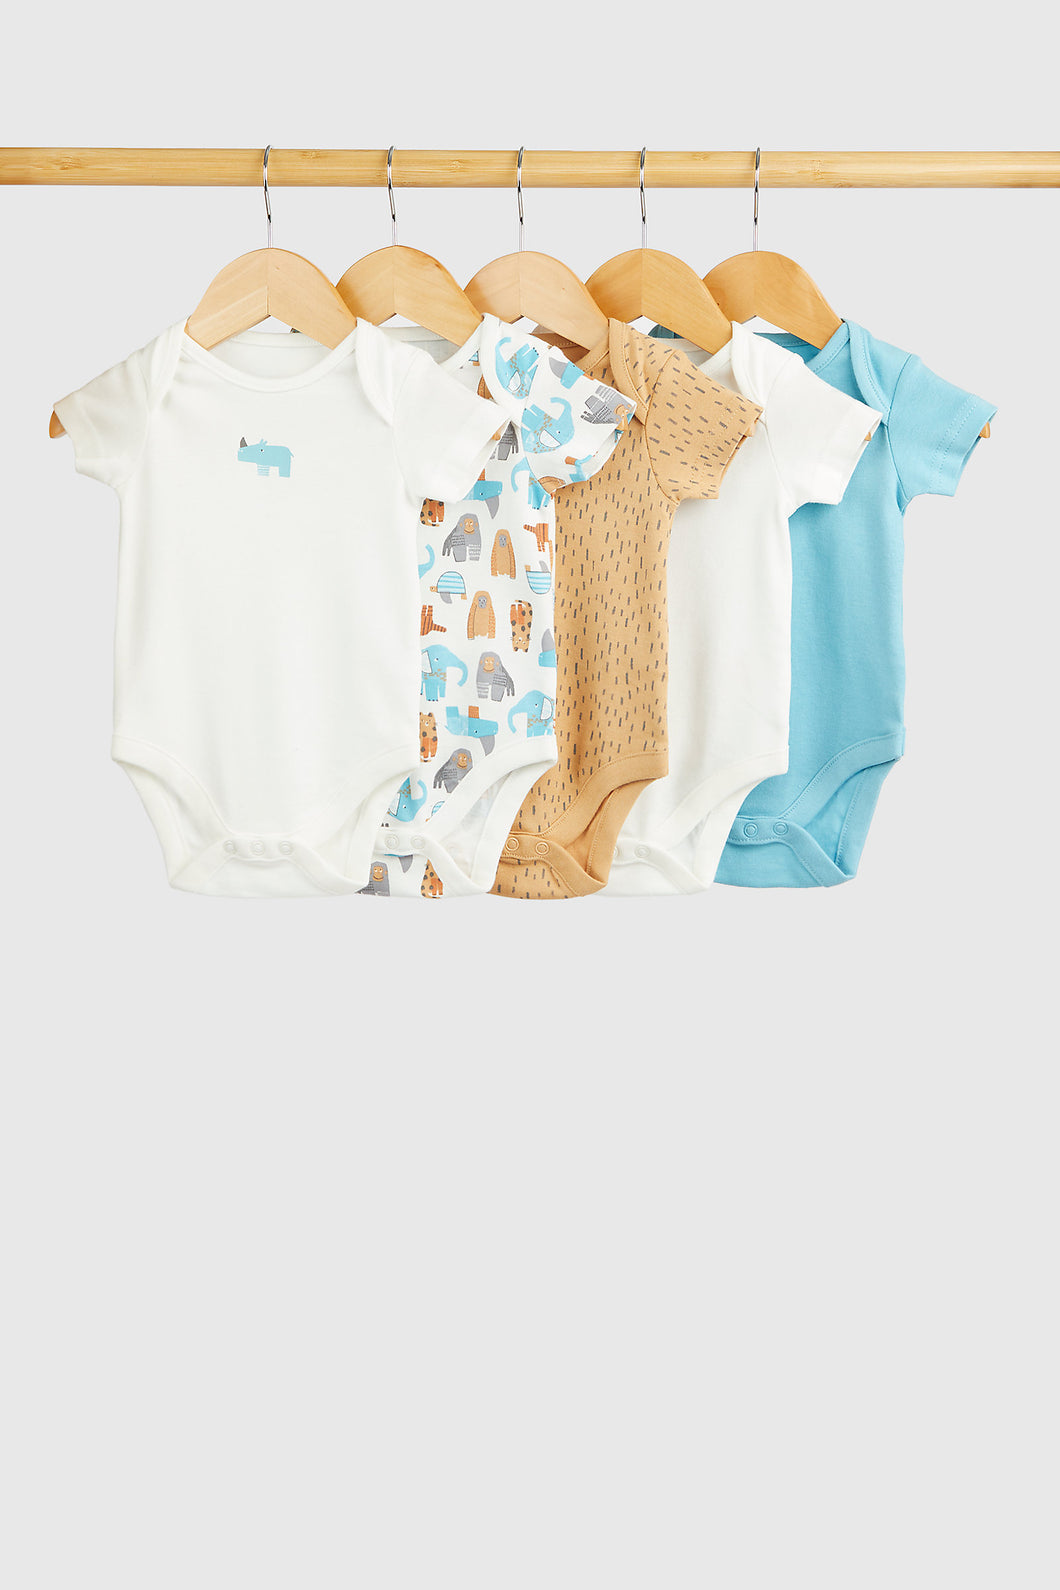 Mothercare Tiger And Elephant Short-Sleeved Baby Bodysuits - 5 Pack